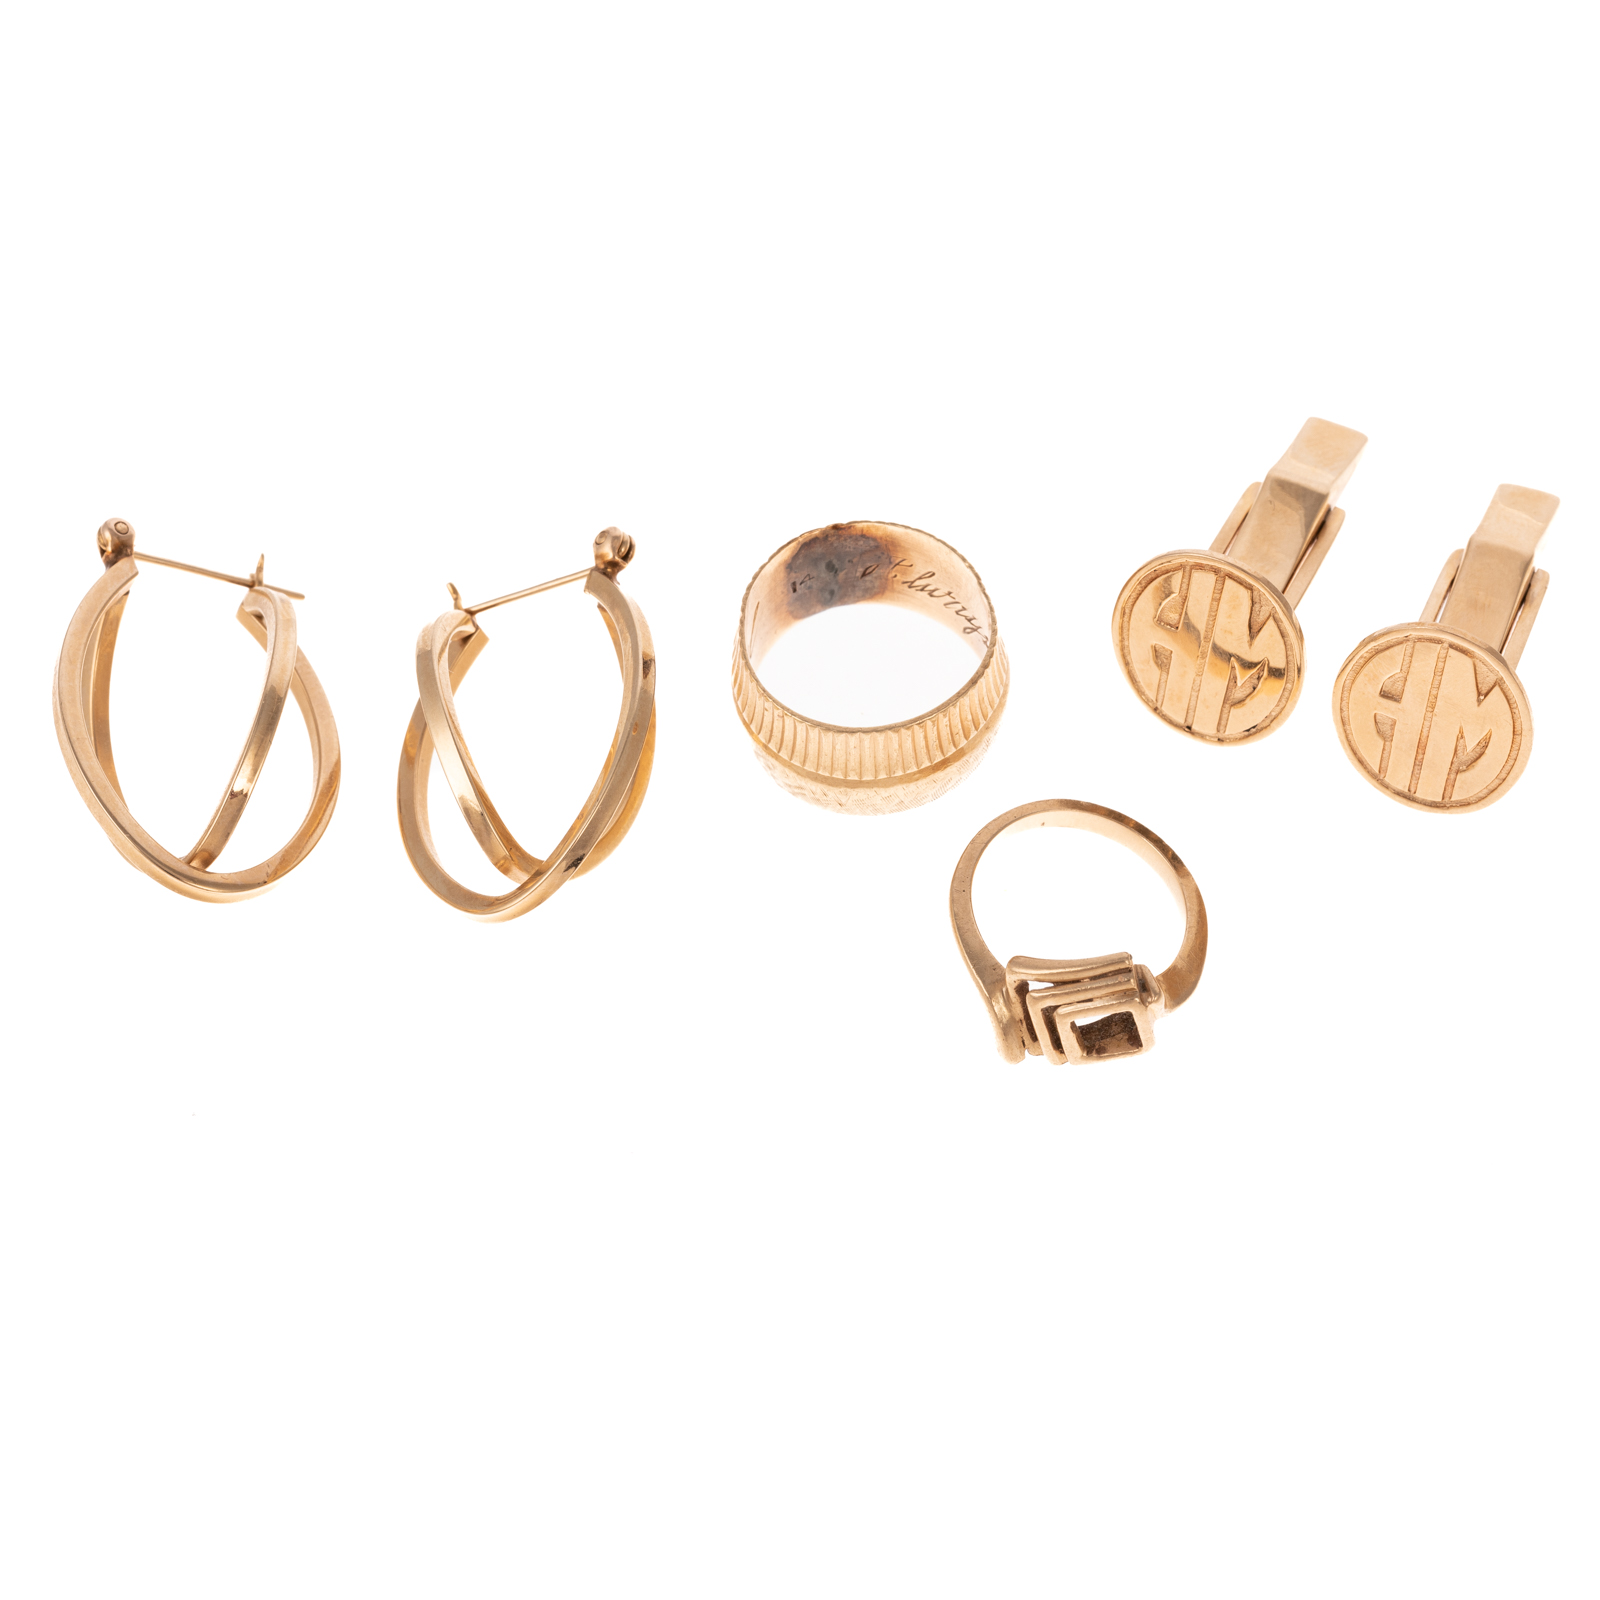 A COLLECTION OF JEWELRY IN 14K